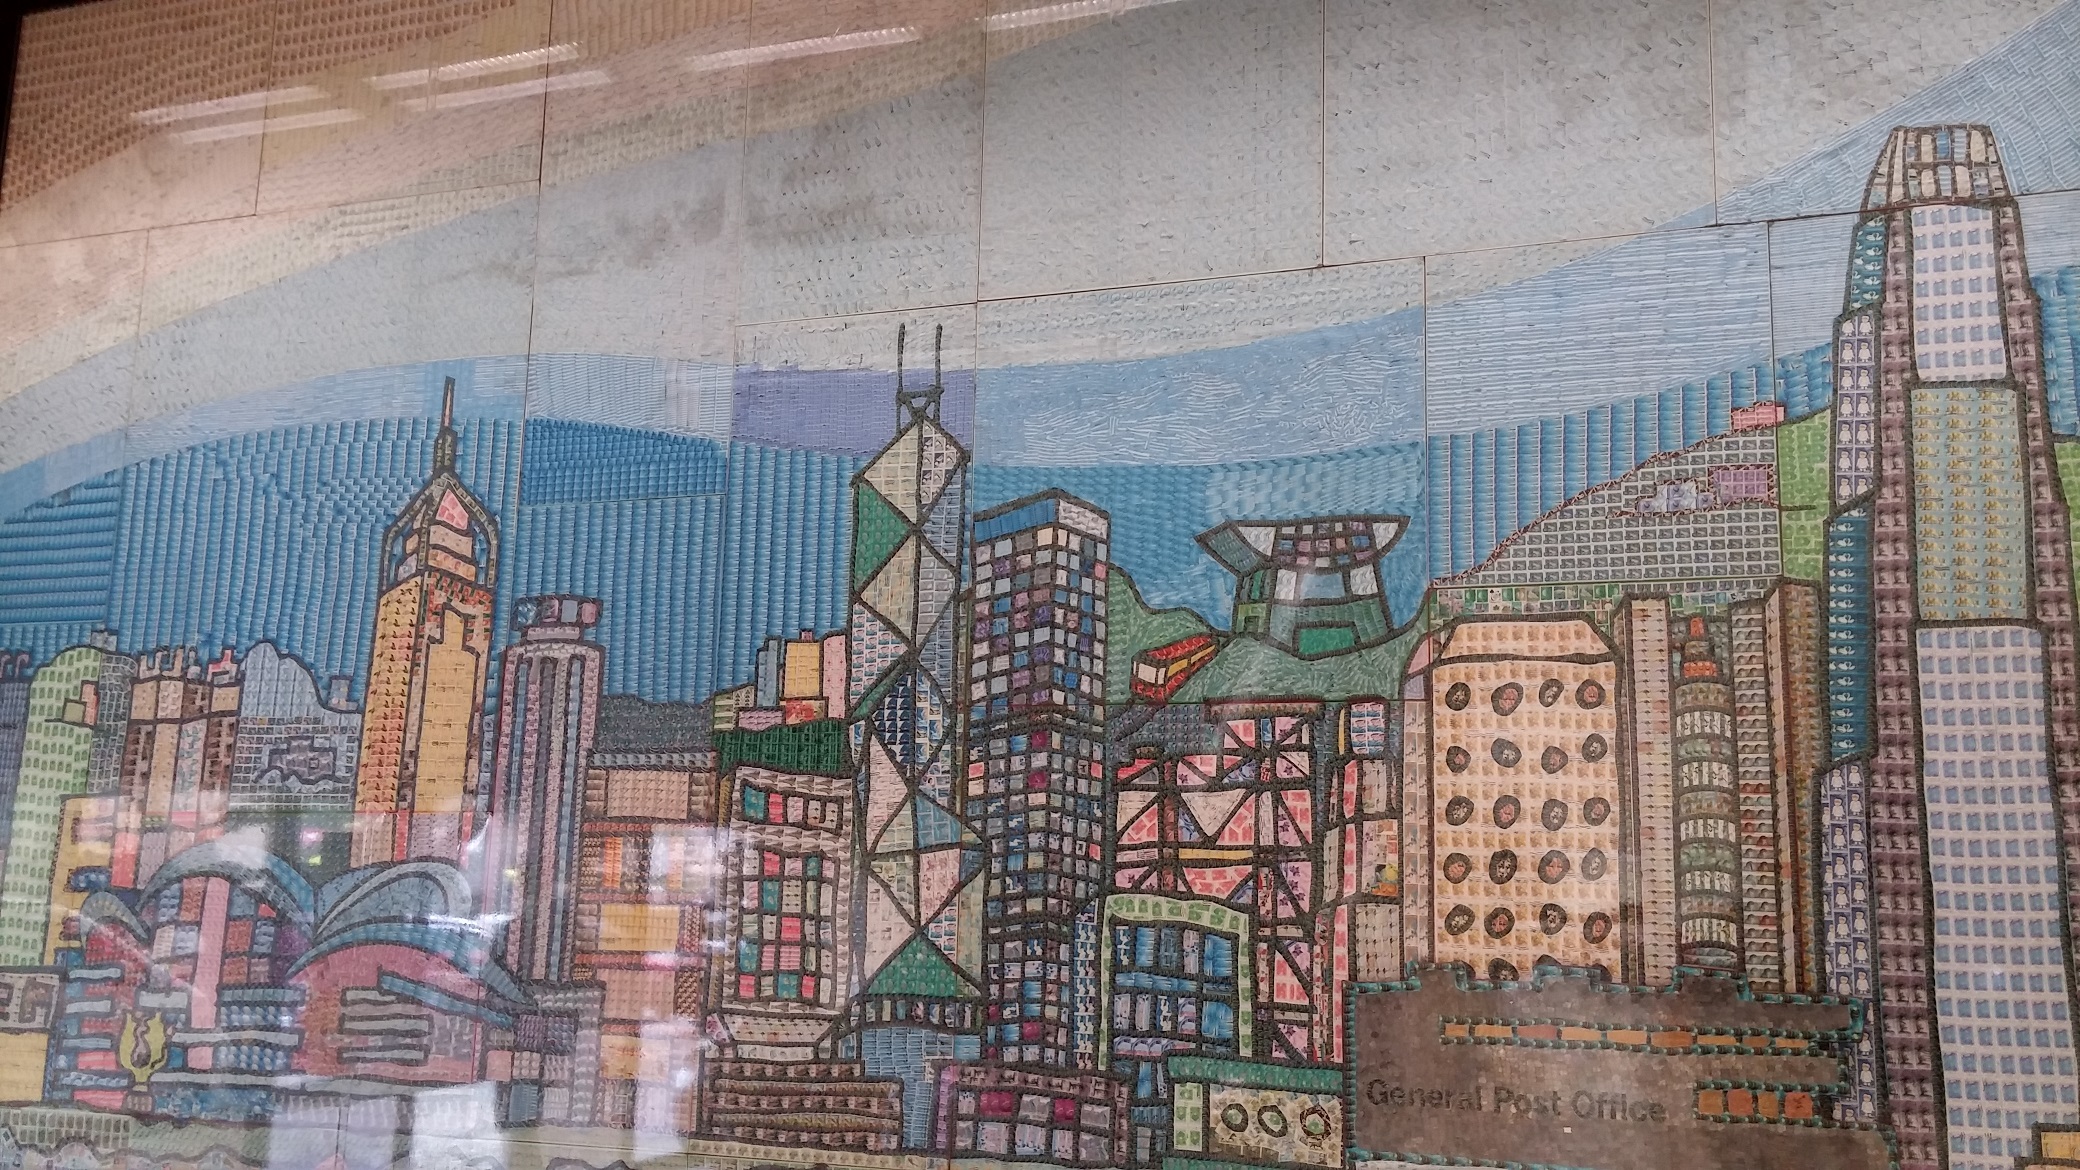 Mosaic in General Post Office shows Hong Kong amazing view made by stamps